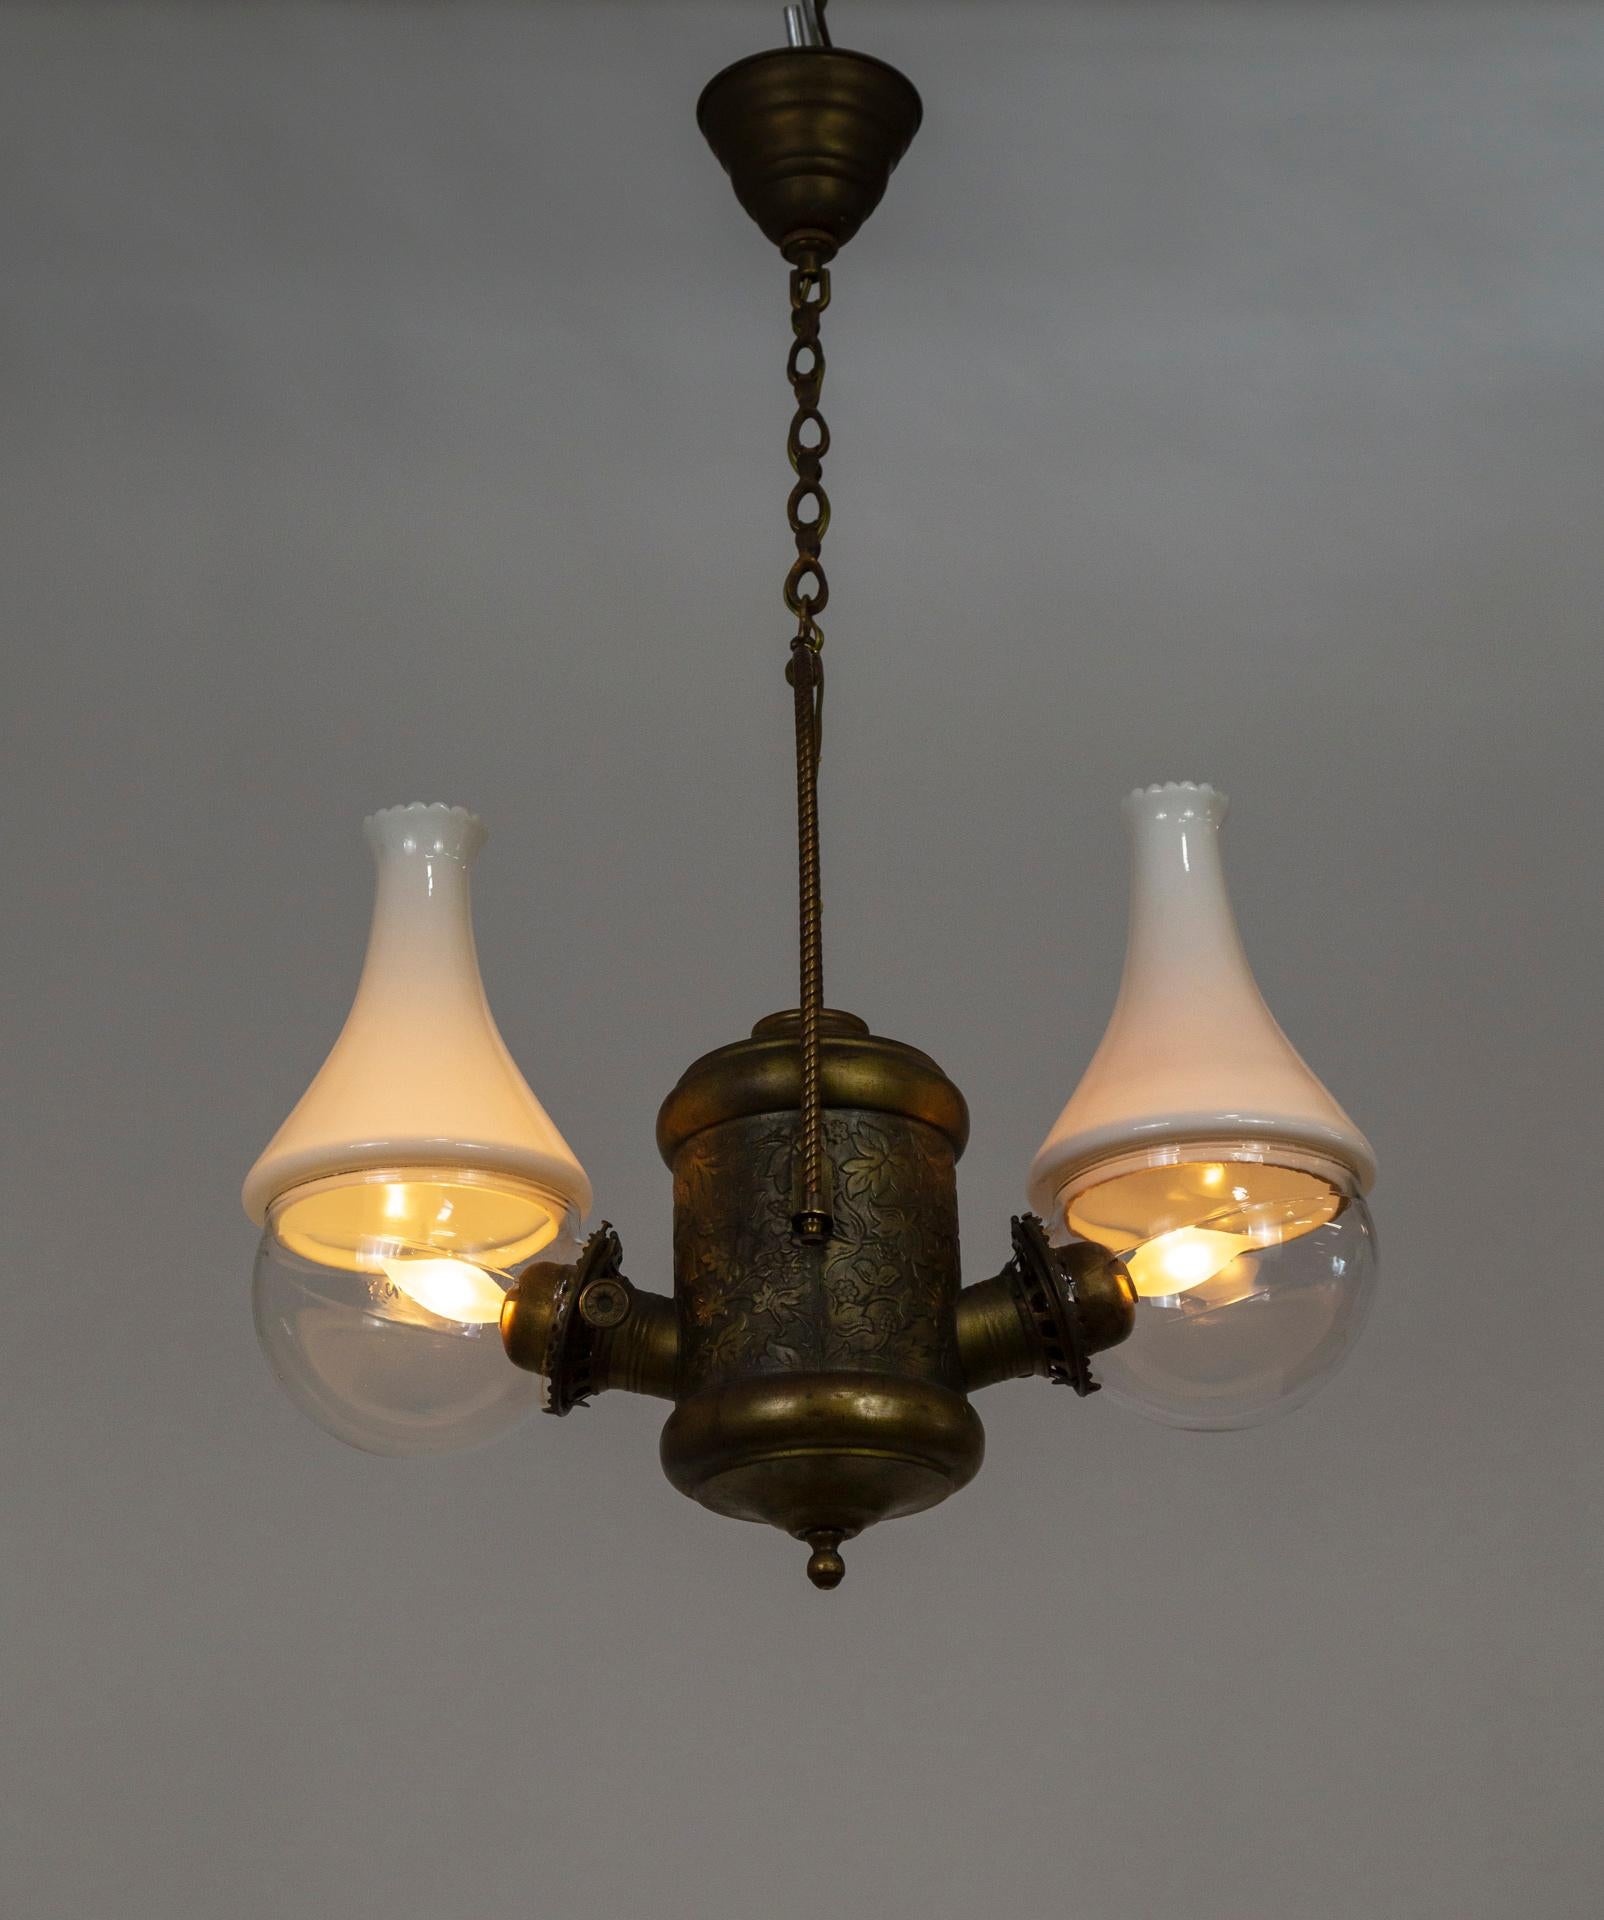 This is an 1890s double light, hanging fixture by The Angle Lamp Co. that was originally lit by kerosene, and is now electrified. Its oil lamps were unique, with the burner on the side at nearly a 90-degree angle to the body of the lamp. It has the